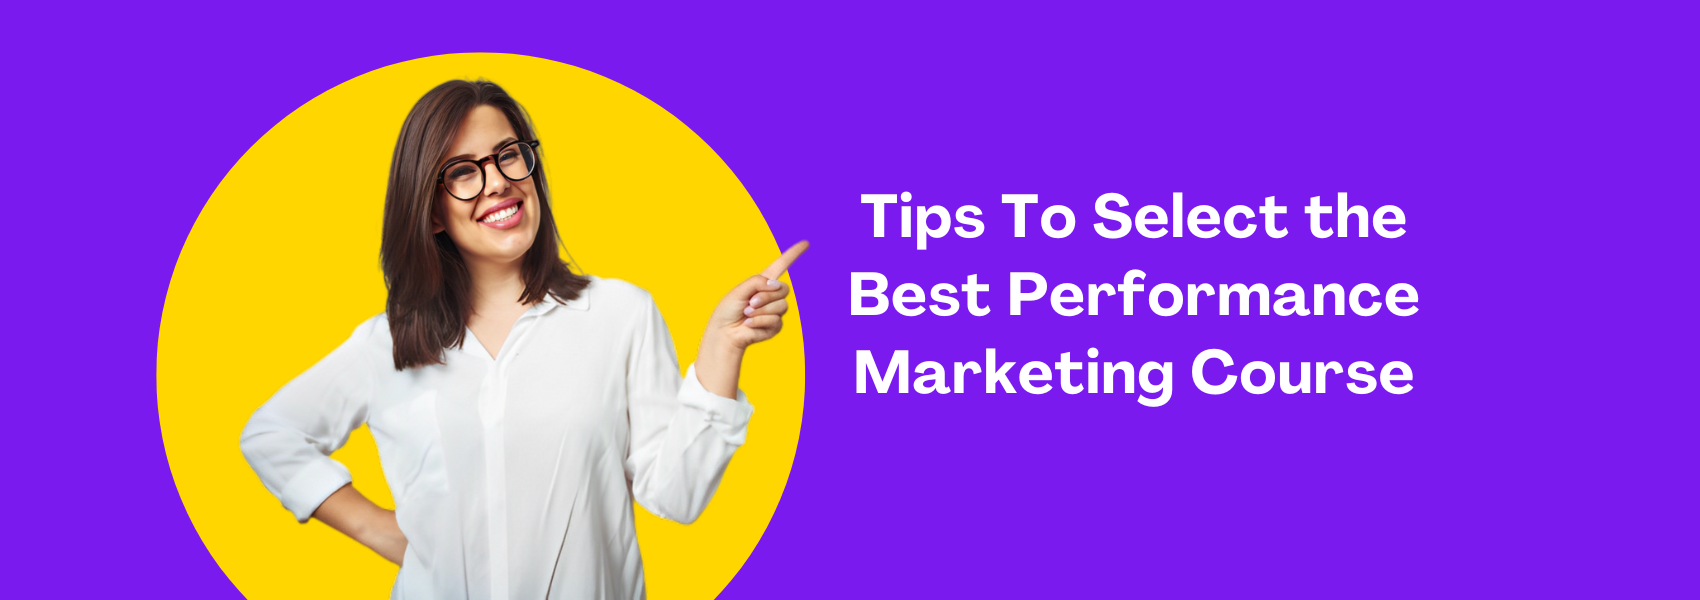 Tips To Select The Best Performance Marketing Course